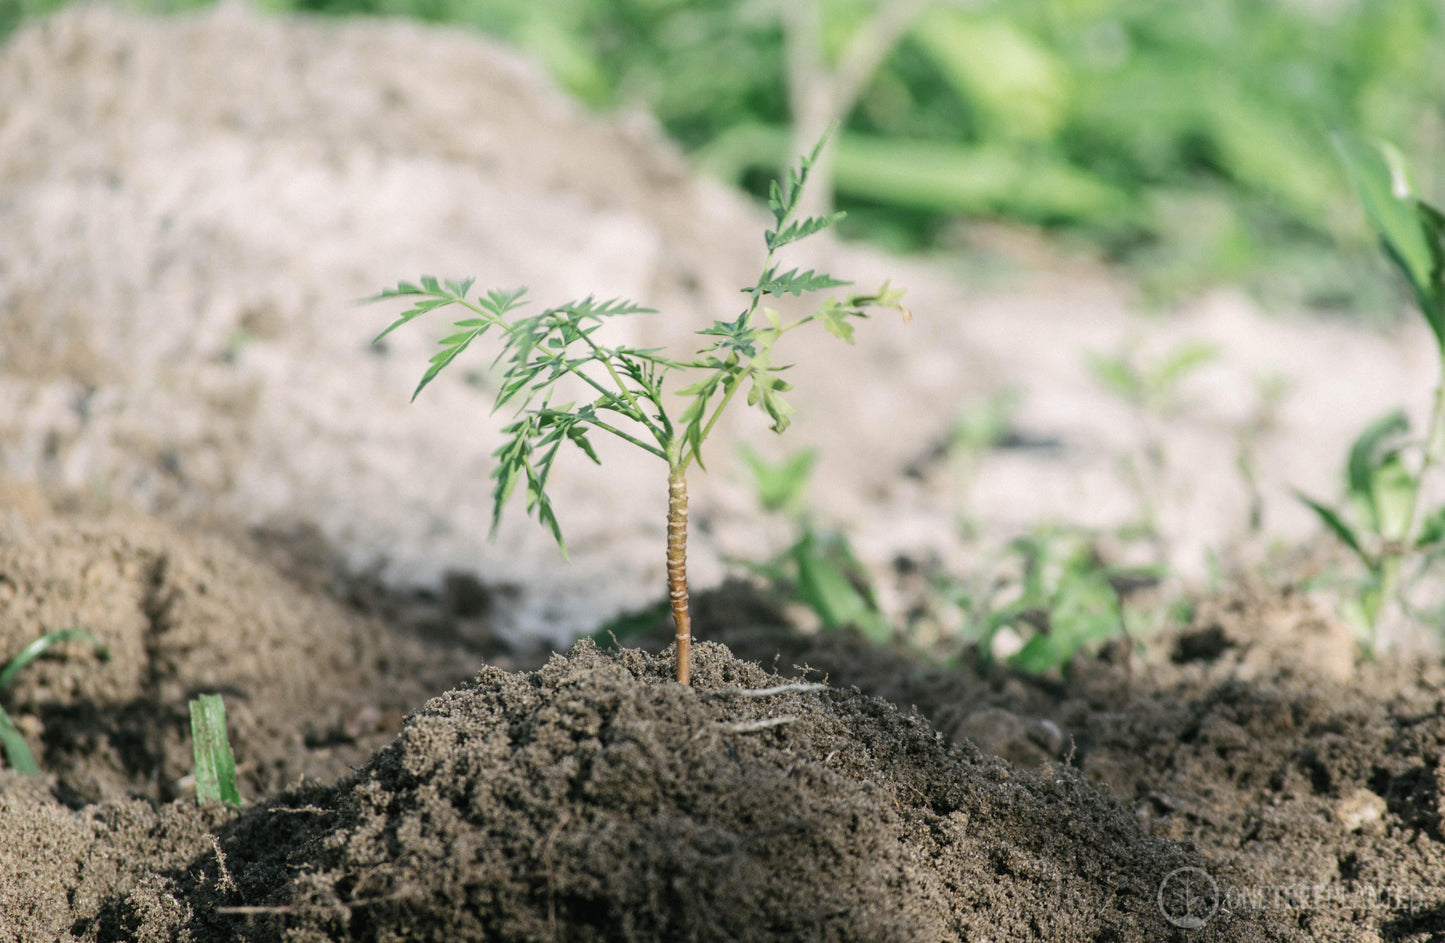 Tree to be Planted - Plant a Tree with One Tree Planted